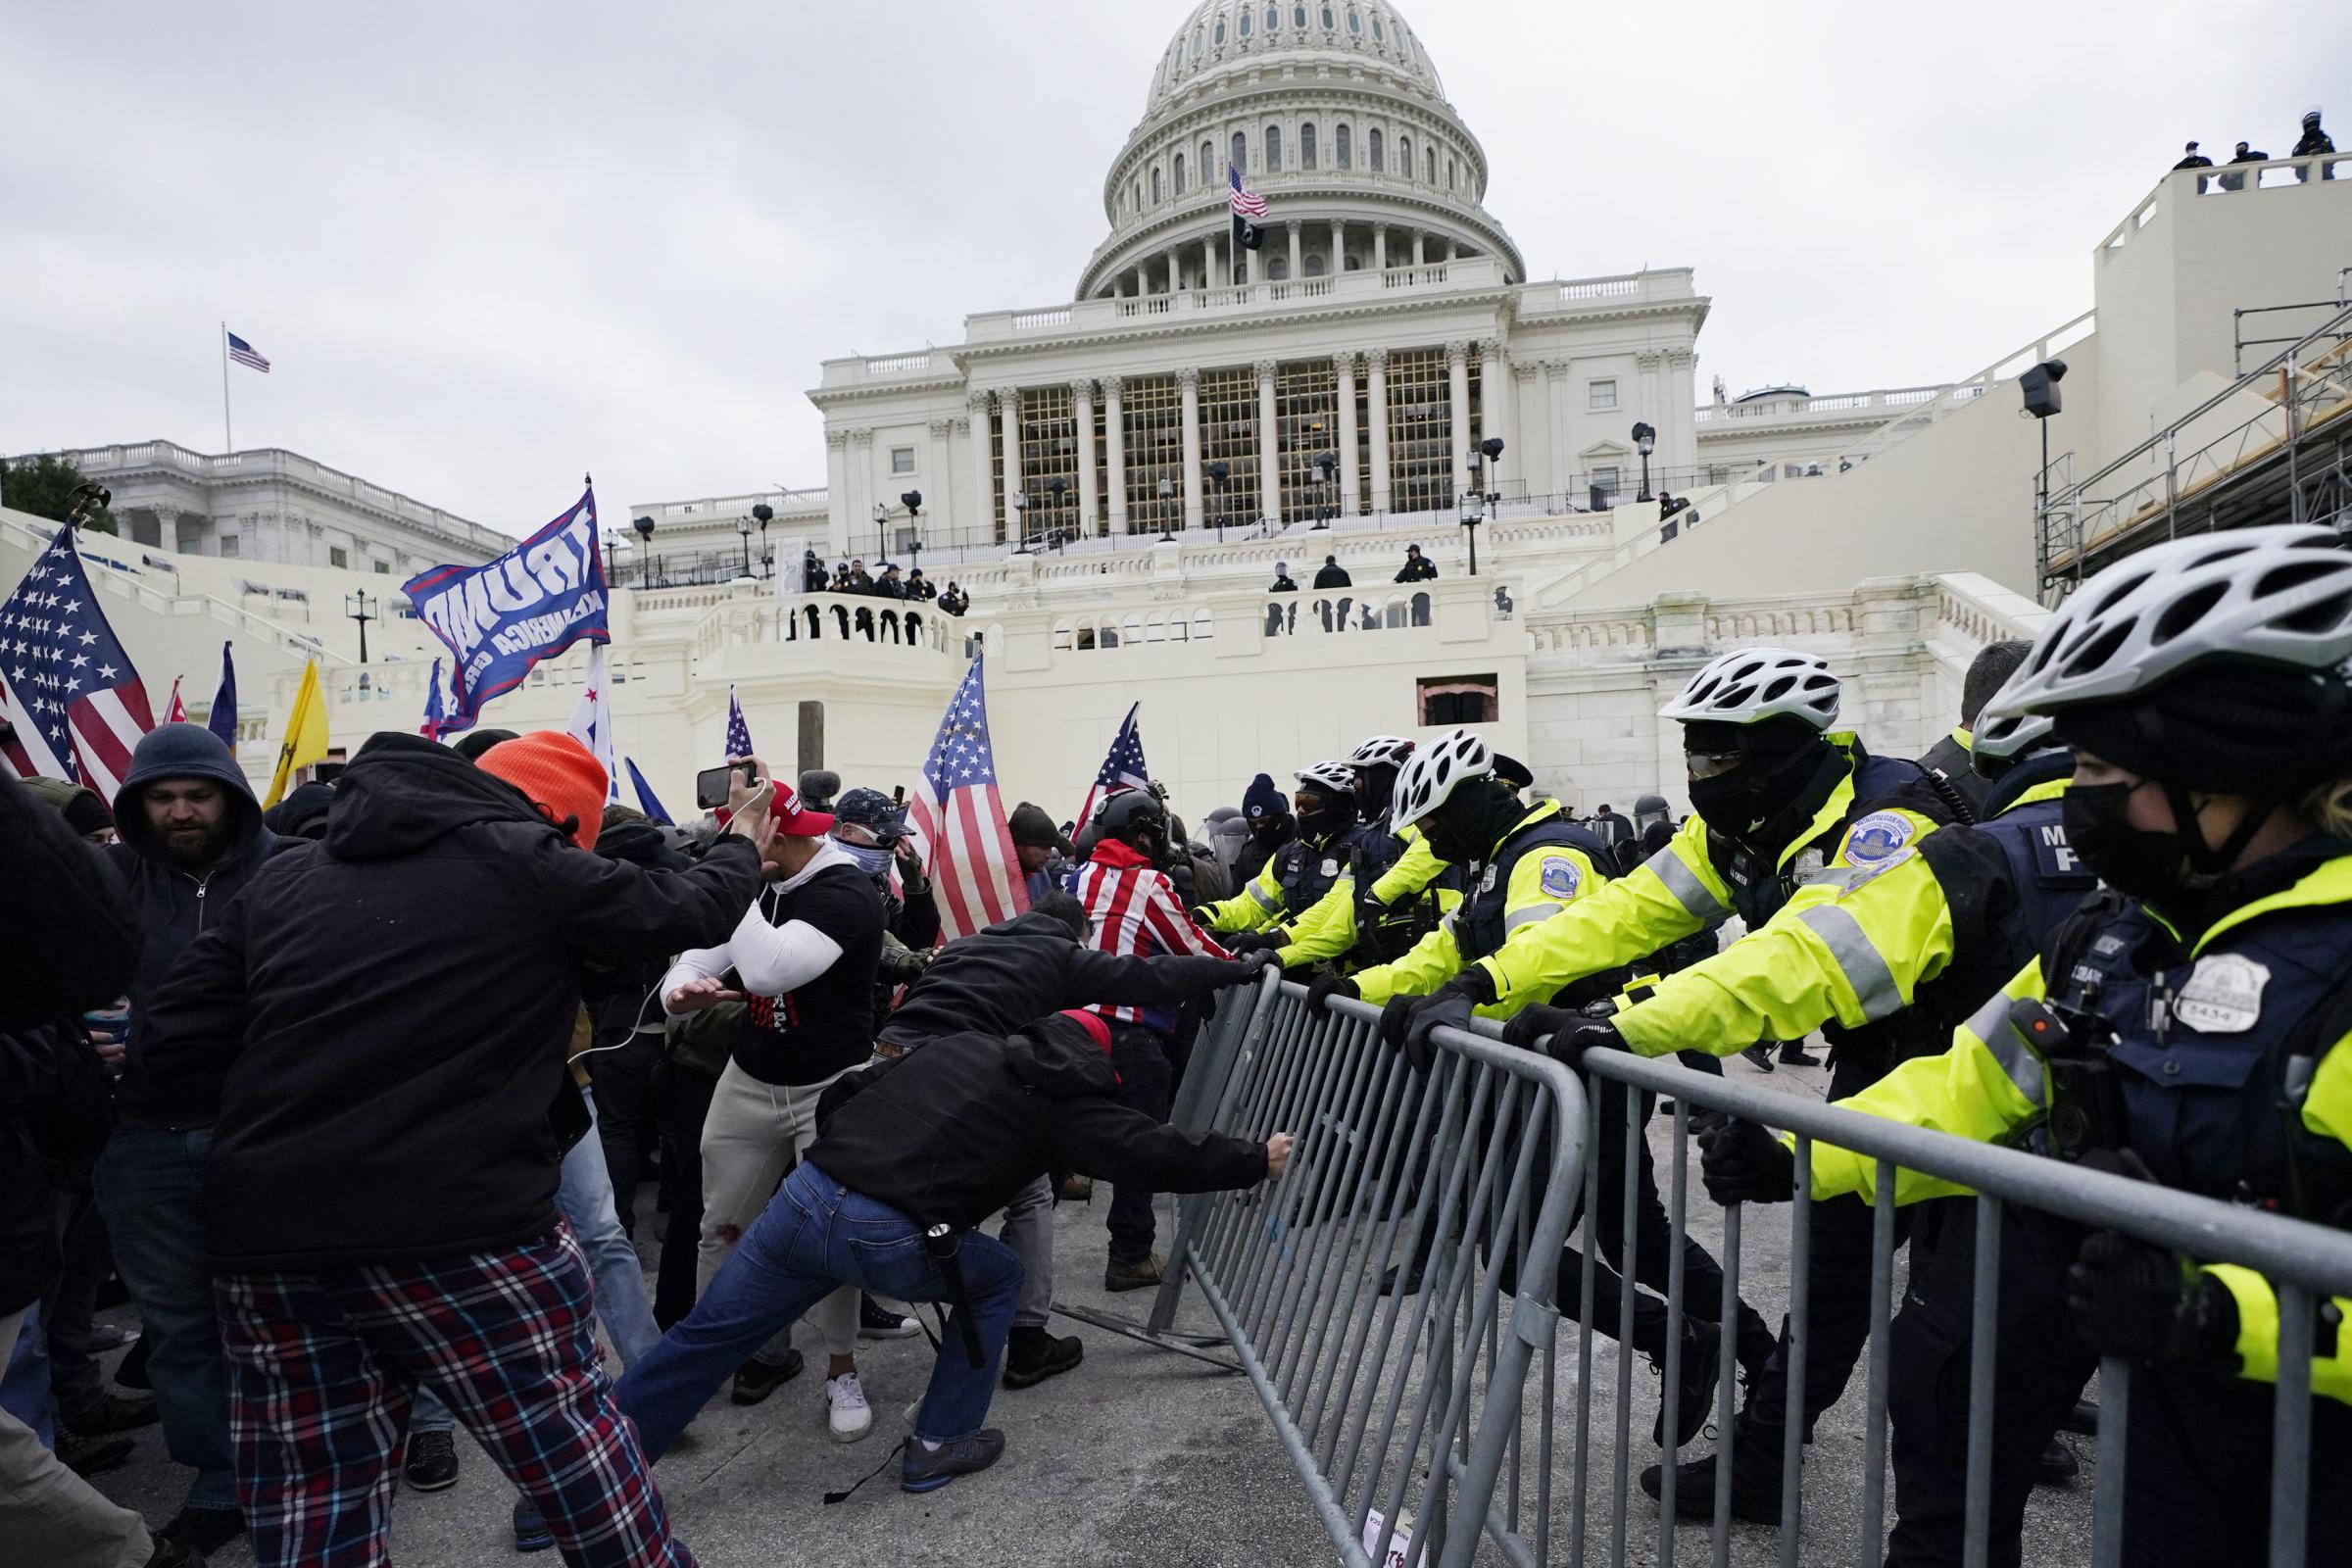 FILE - Insurrectionists loyal to President Donald Trump try to break through a police barrier, Wednesday, Jan. 6, 2021, at the Capitol in Washington. Facing prison time and dire personal consequences for storming the U.S. Capitol, some Jan. 6 defendants